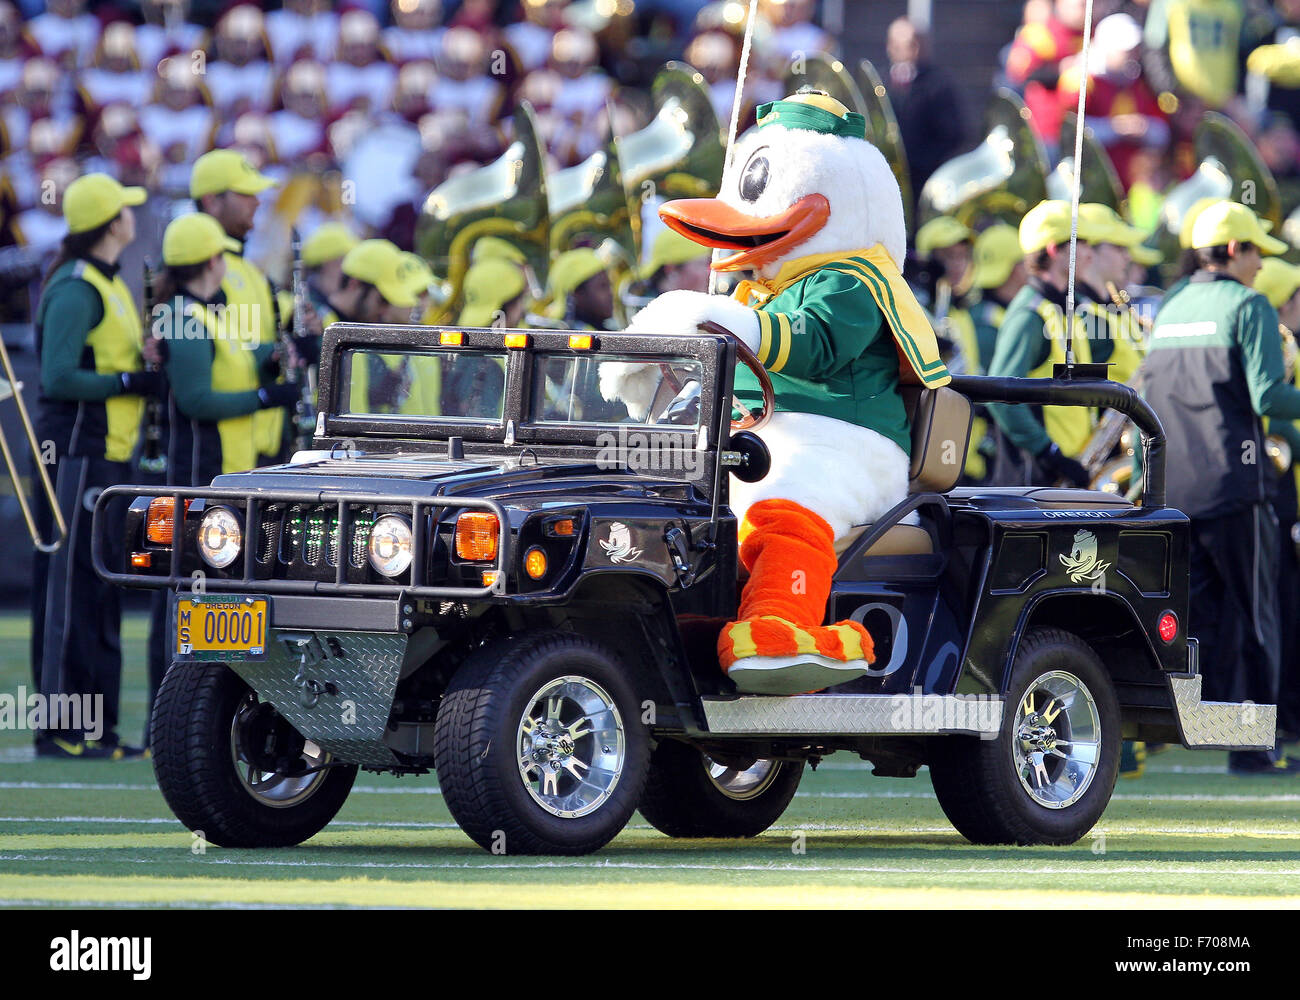 Autzen Stadium, Eugene, OR, USA. 21st Nov, 2015. The Oregon Duck drives a mini-Hummer prior to the NCAA football game between the Ducks and the USC Trojans at Autzen Stadium, Eugene, OR. Larry C. Lawson/CSM/Alamy Live News Stock Photo